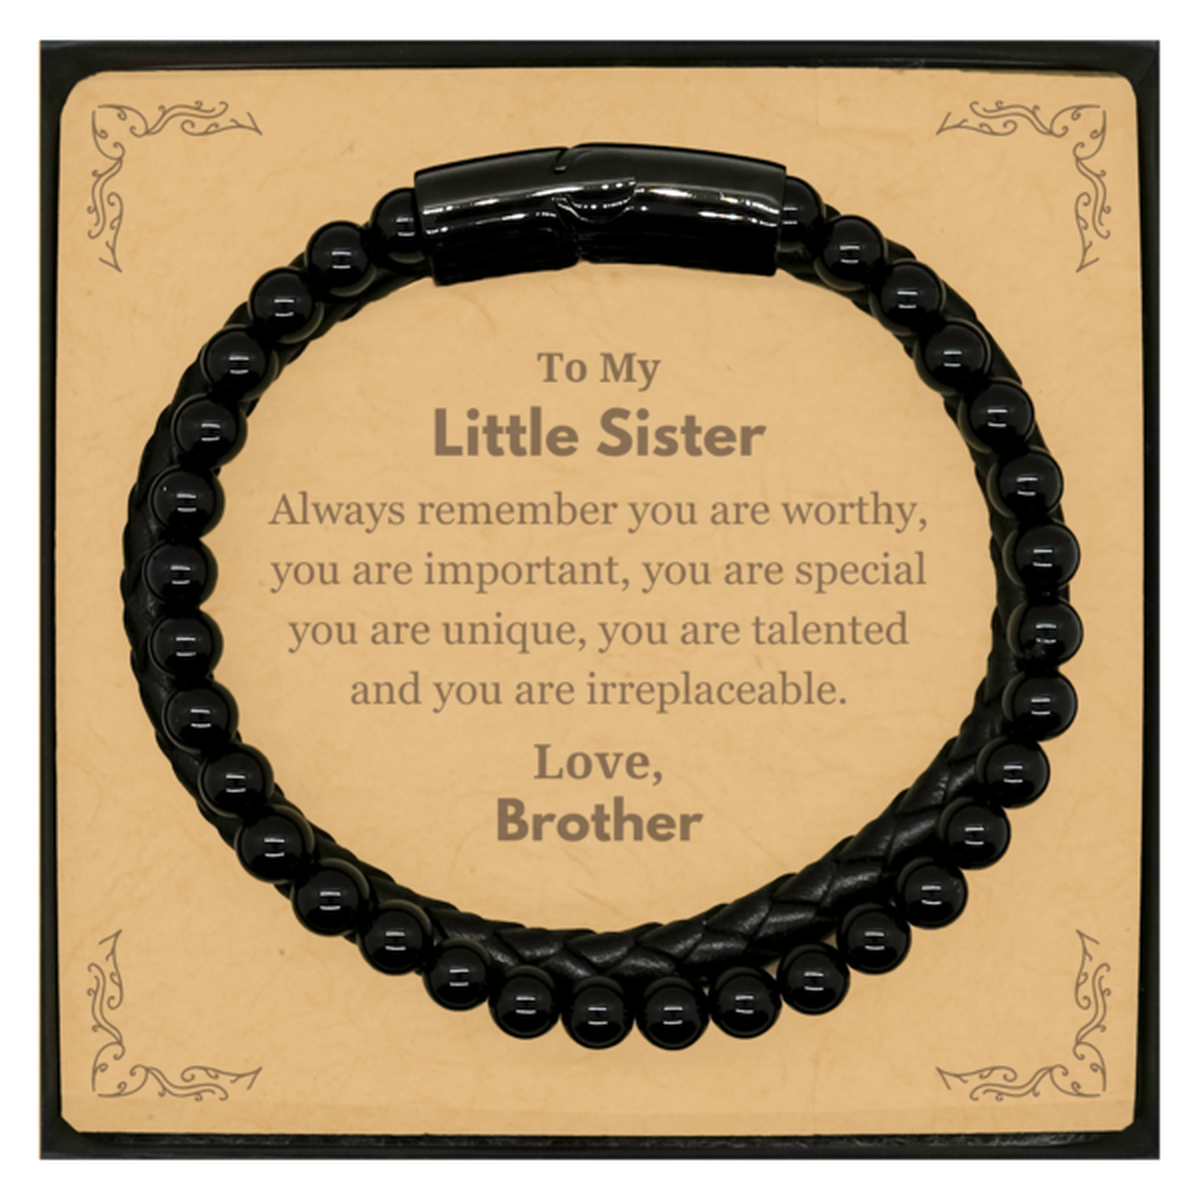 Little Sister Birthday Gifts from Brother, Inspirational Stone Leather Bracelets for Little Sister Christmas Graduation Gifts for Little Sister Always remember you are worthy, you are important. Love, Brother